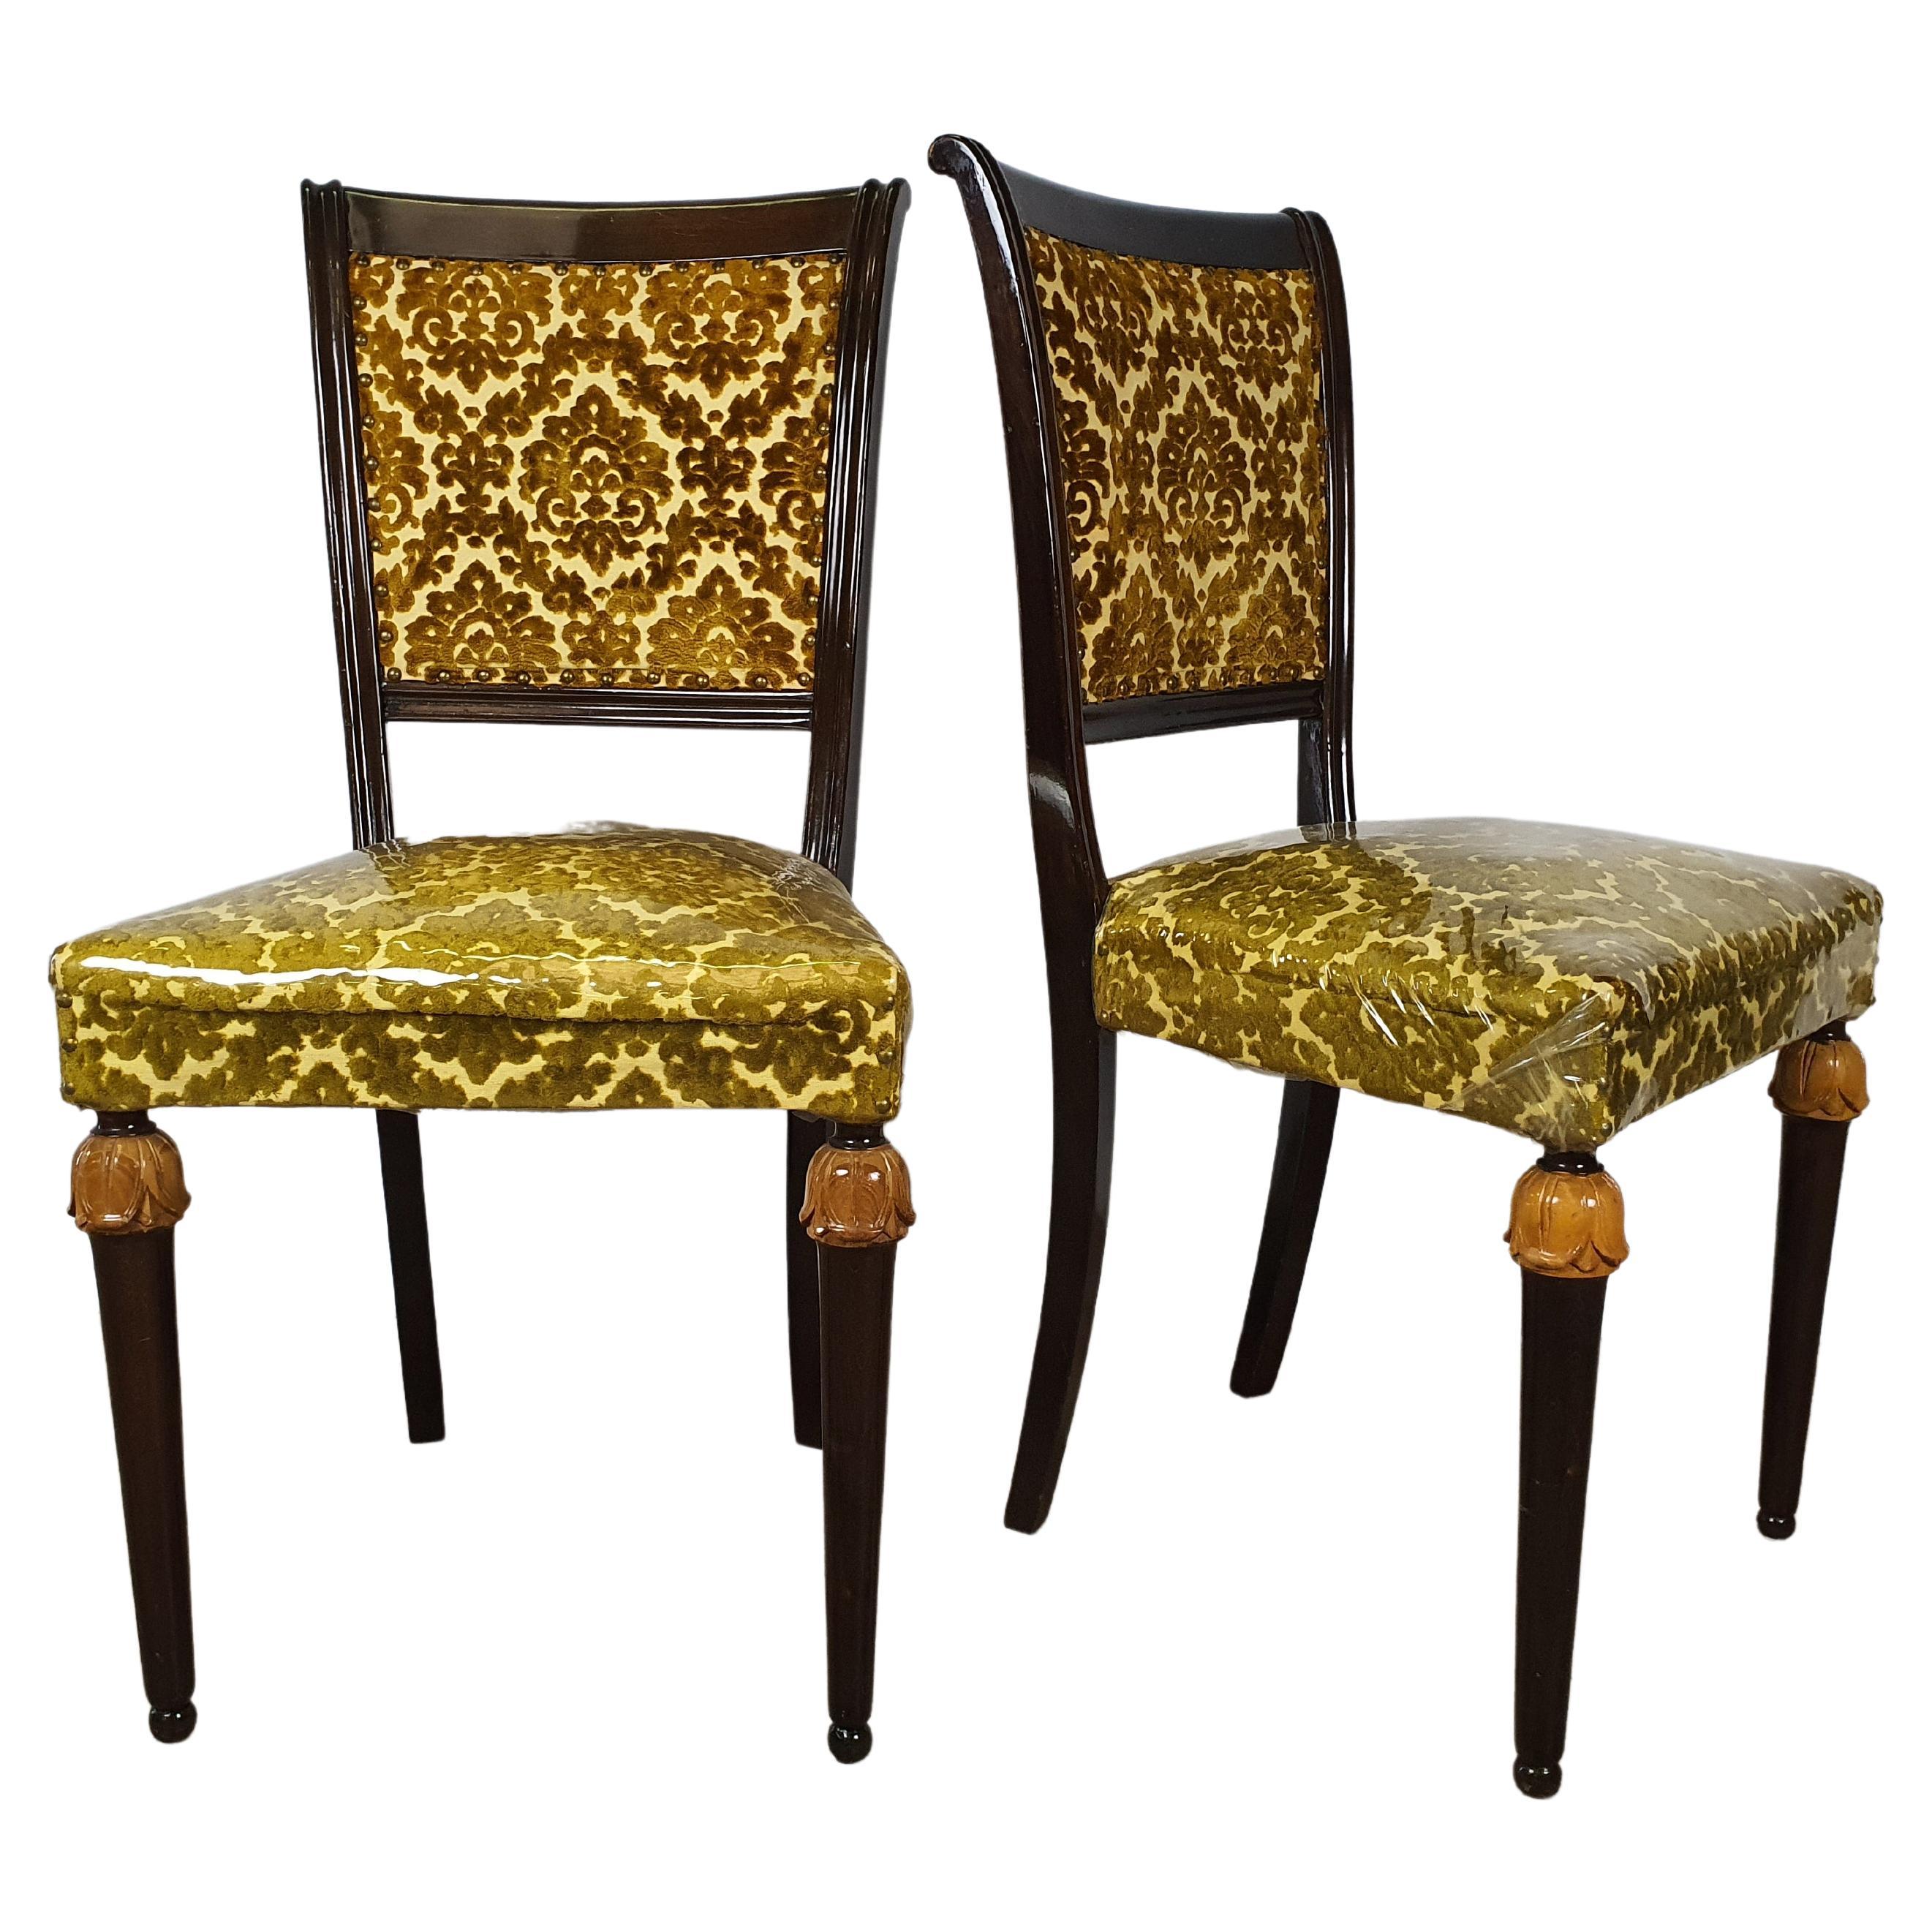 Set of Two Empire Style Padded Chairs from 50s